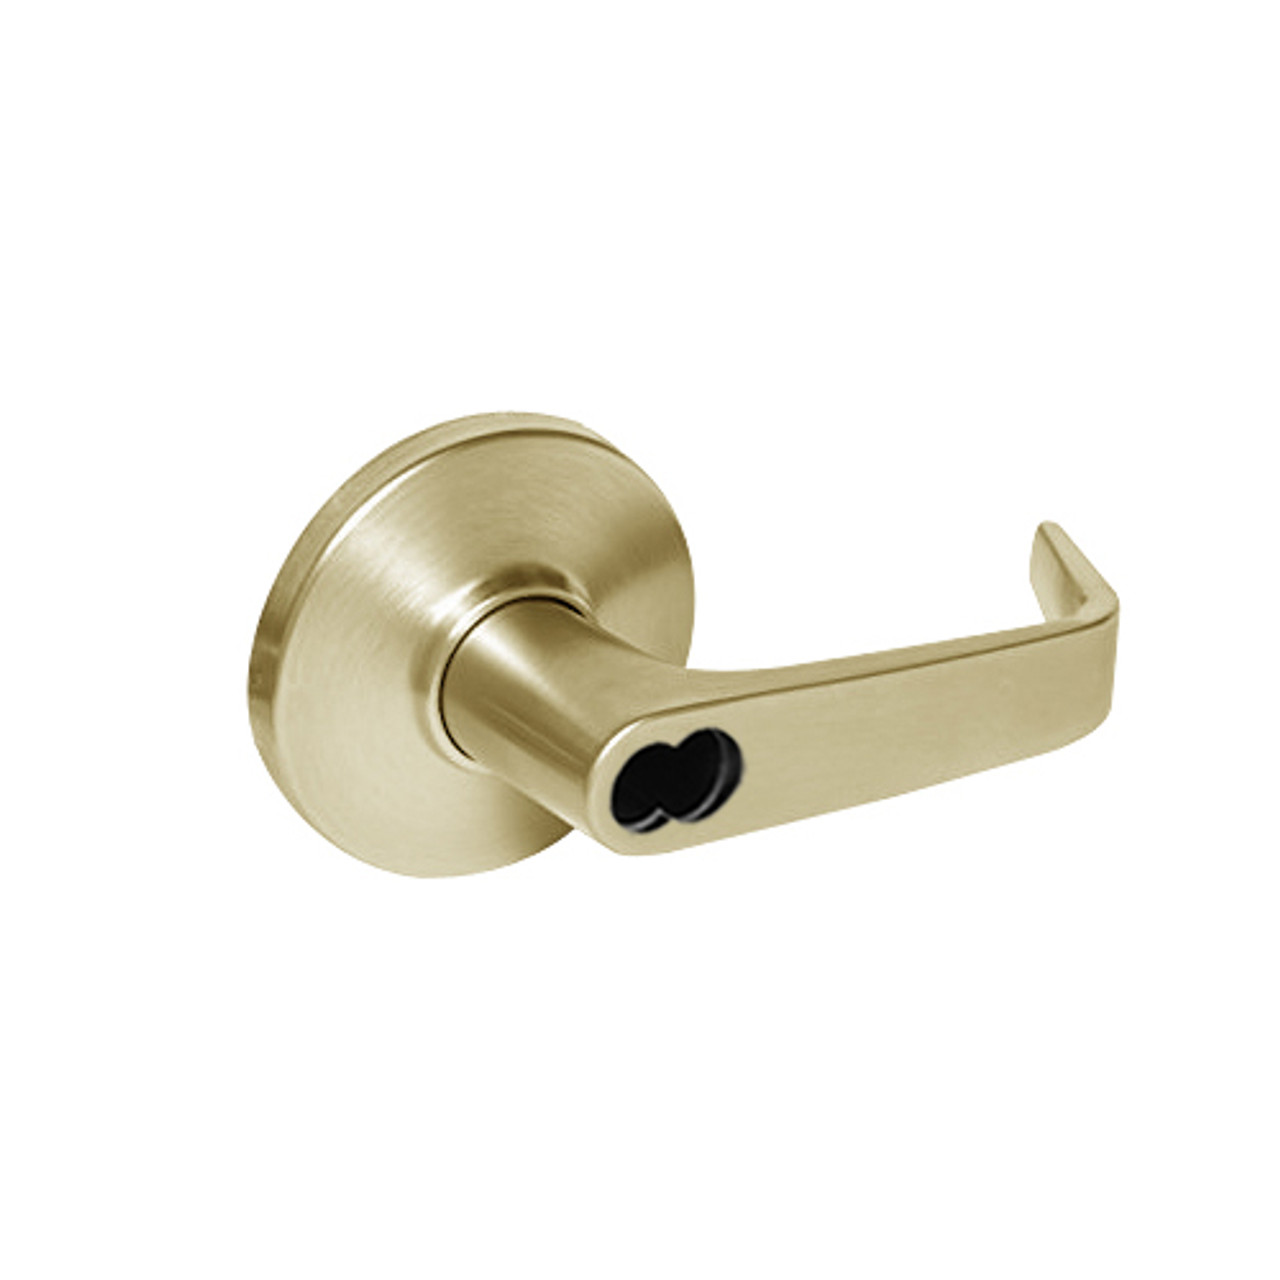 9K37A15DS3606 Best 9K Series Dormitory or Storeroom Cylindrical Lever Locks with Contour Angle with Return Lever Design Accept 7 Pin Best Core in Satin Brass